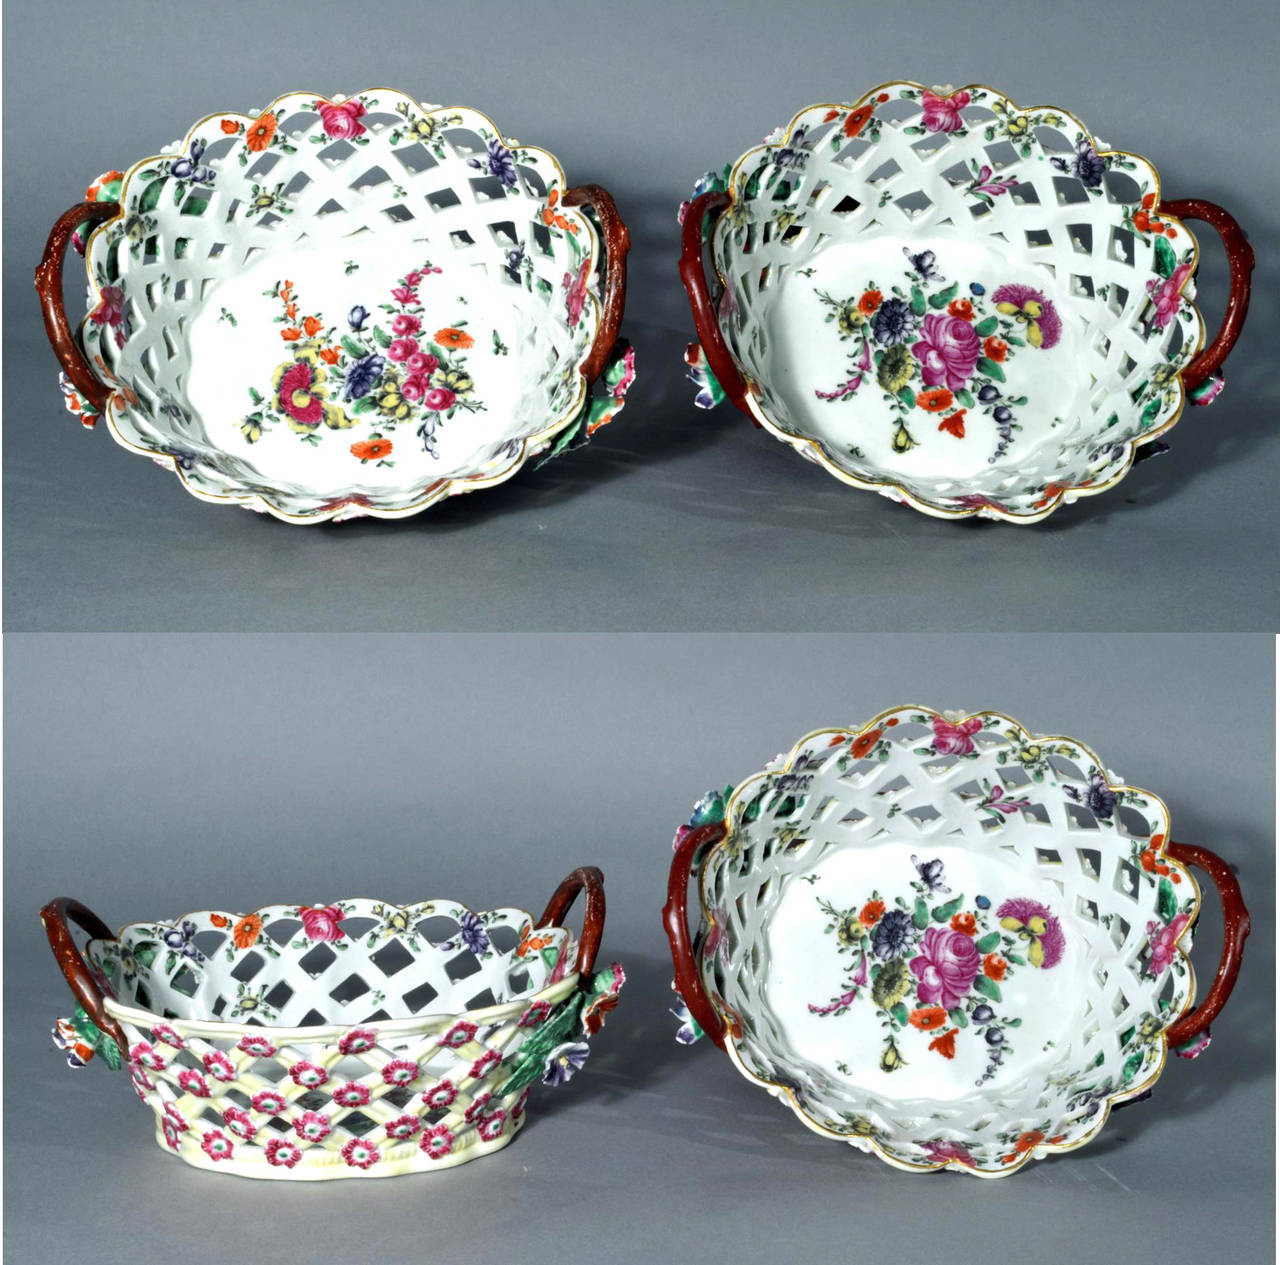 The baskets, of oval shape, has yellow ground pierced trellis sides.  The baskets are painted on the inside with a large bouquet of spring flowers of puce, iron-red, purple, yellow and green, and scattered brightly colored sprigs around the sides. 